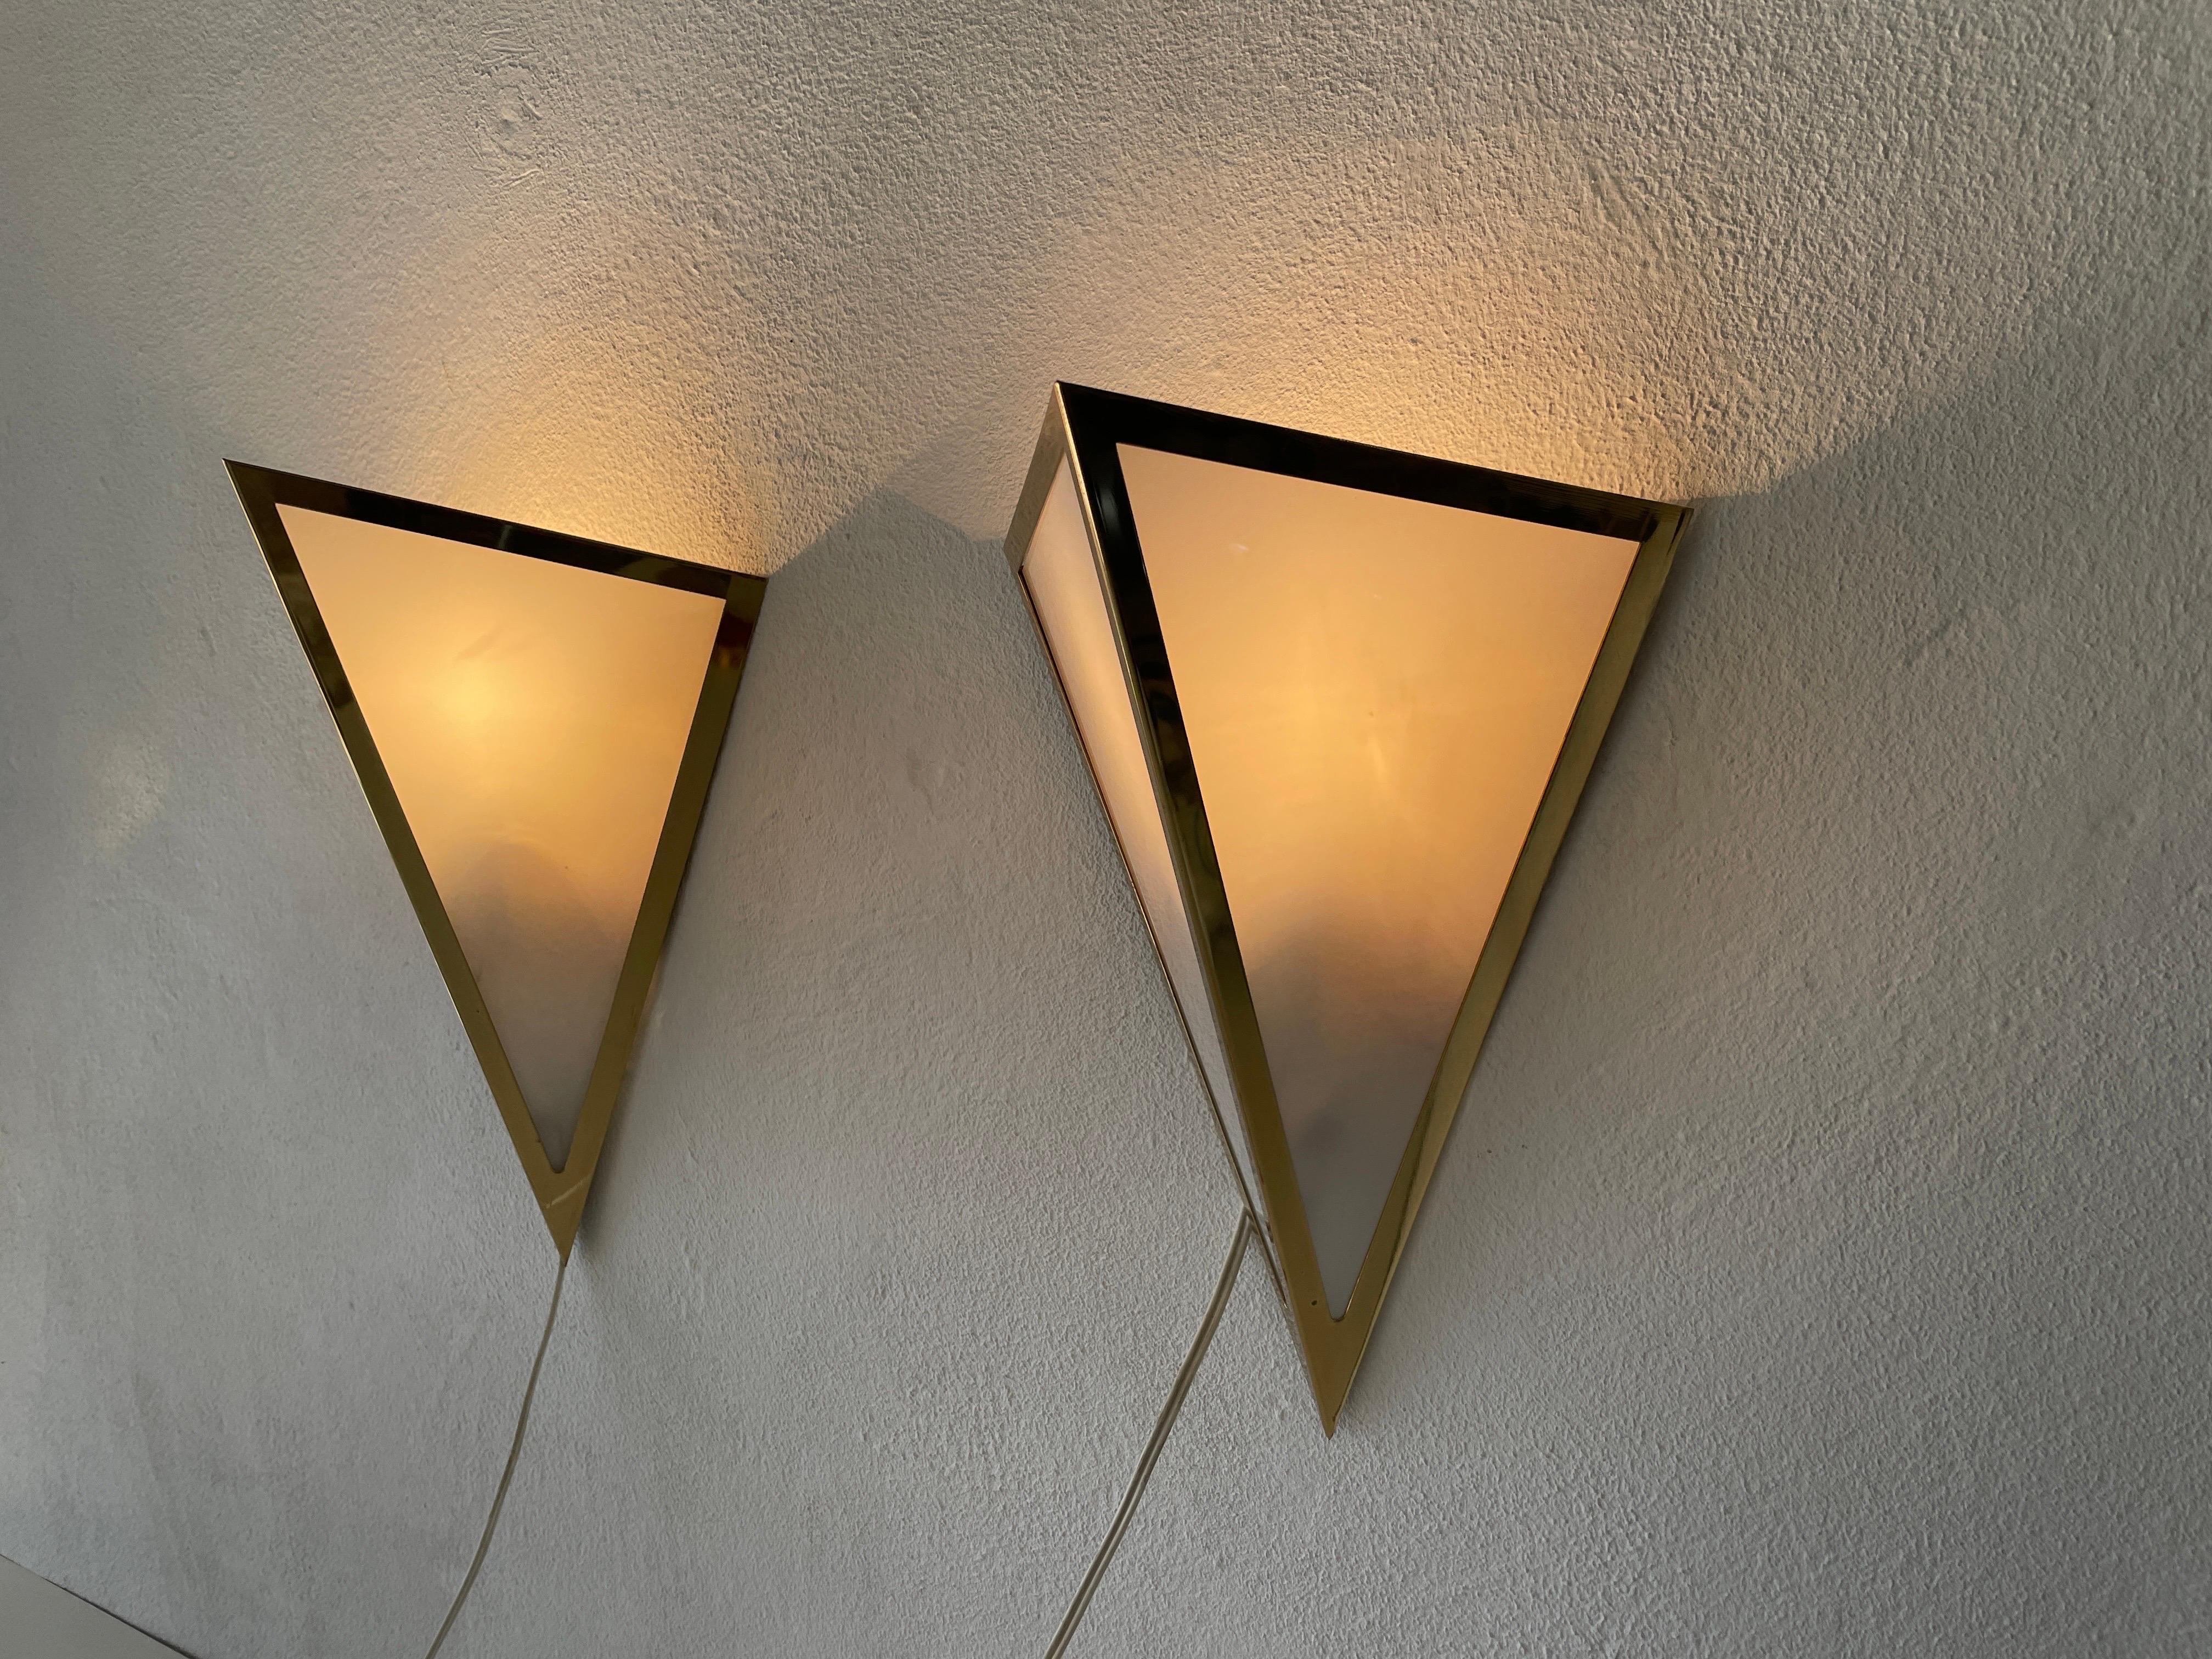 Triangle Design Opal Glass and Gold Metal Pair of Sconces by WKR, 1970s, Germany For Sale 3